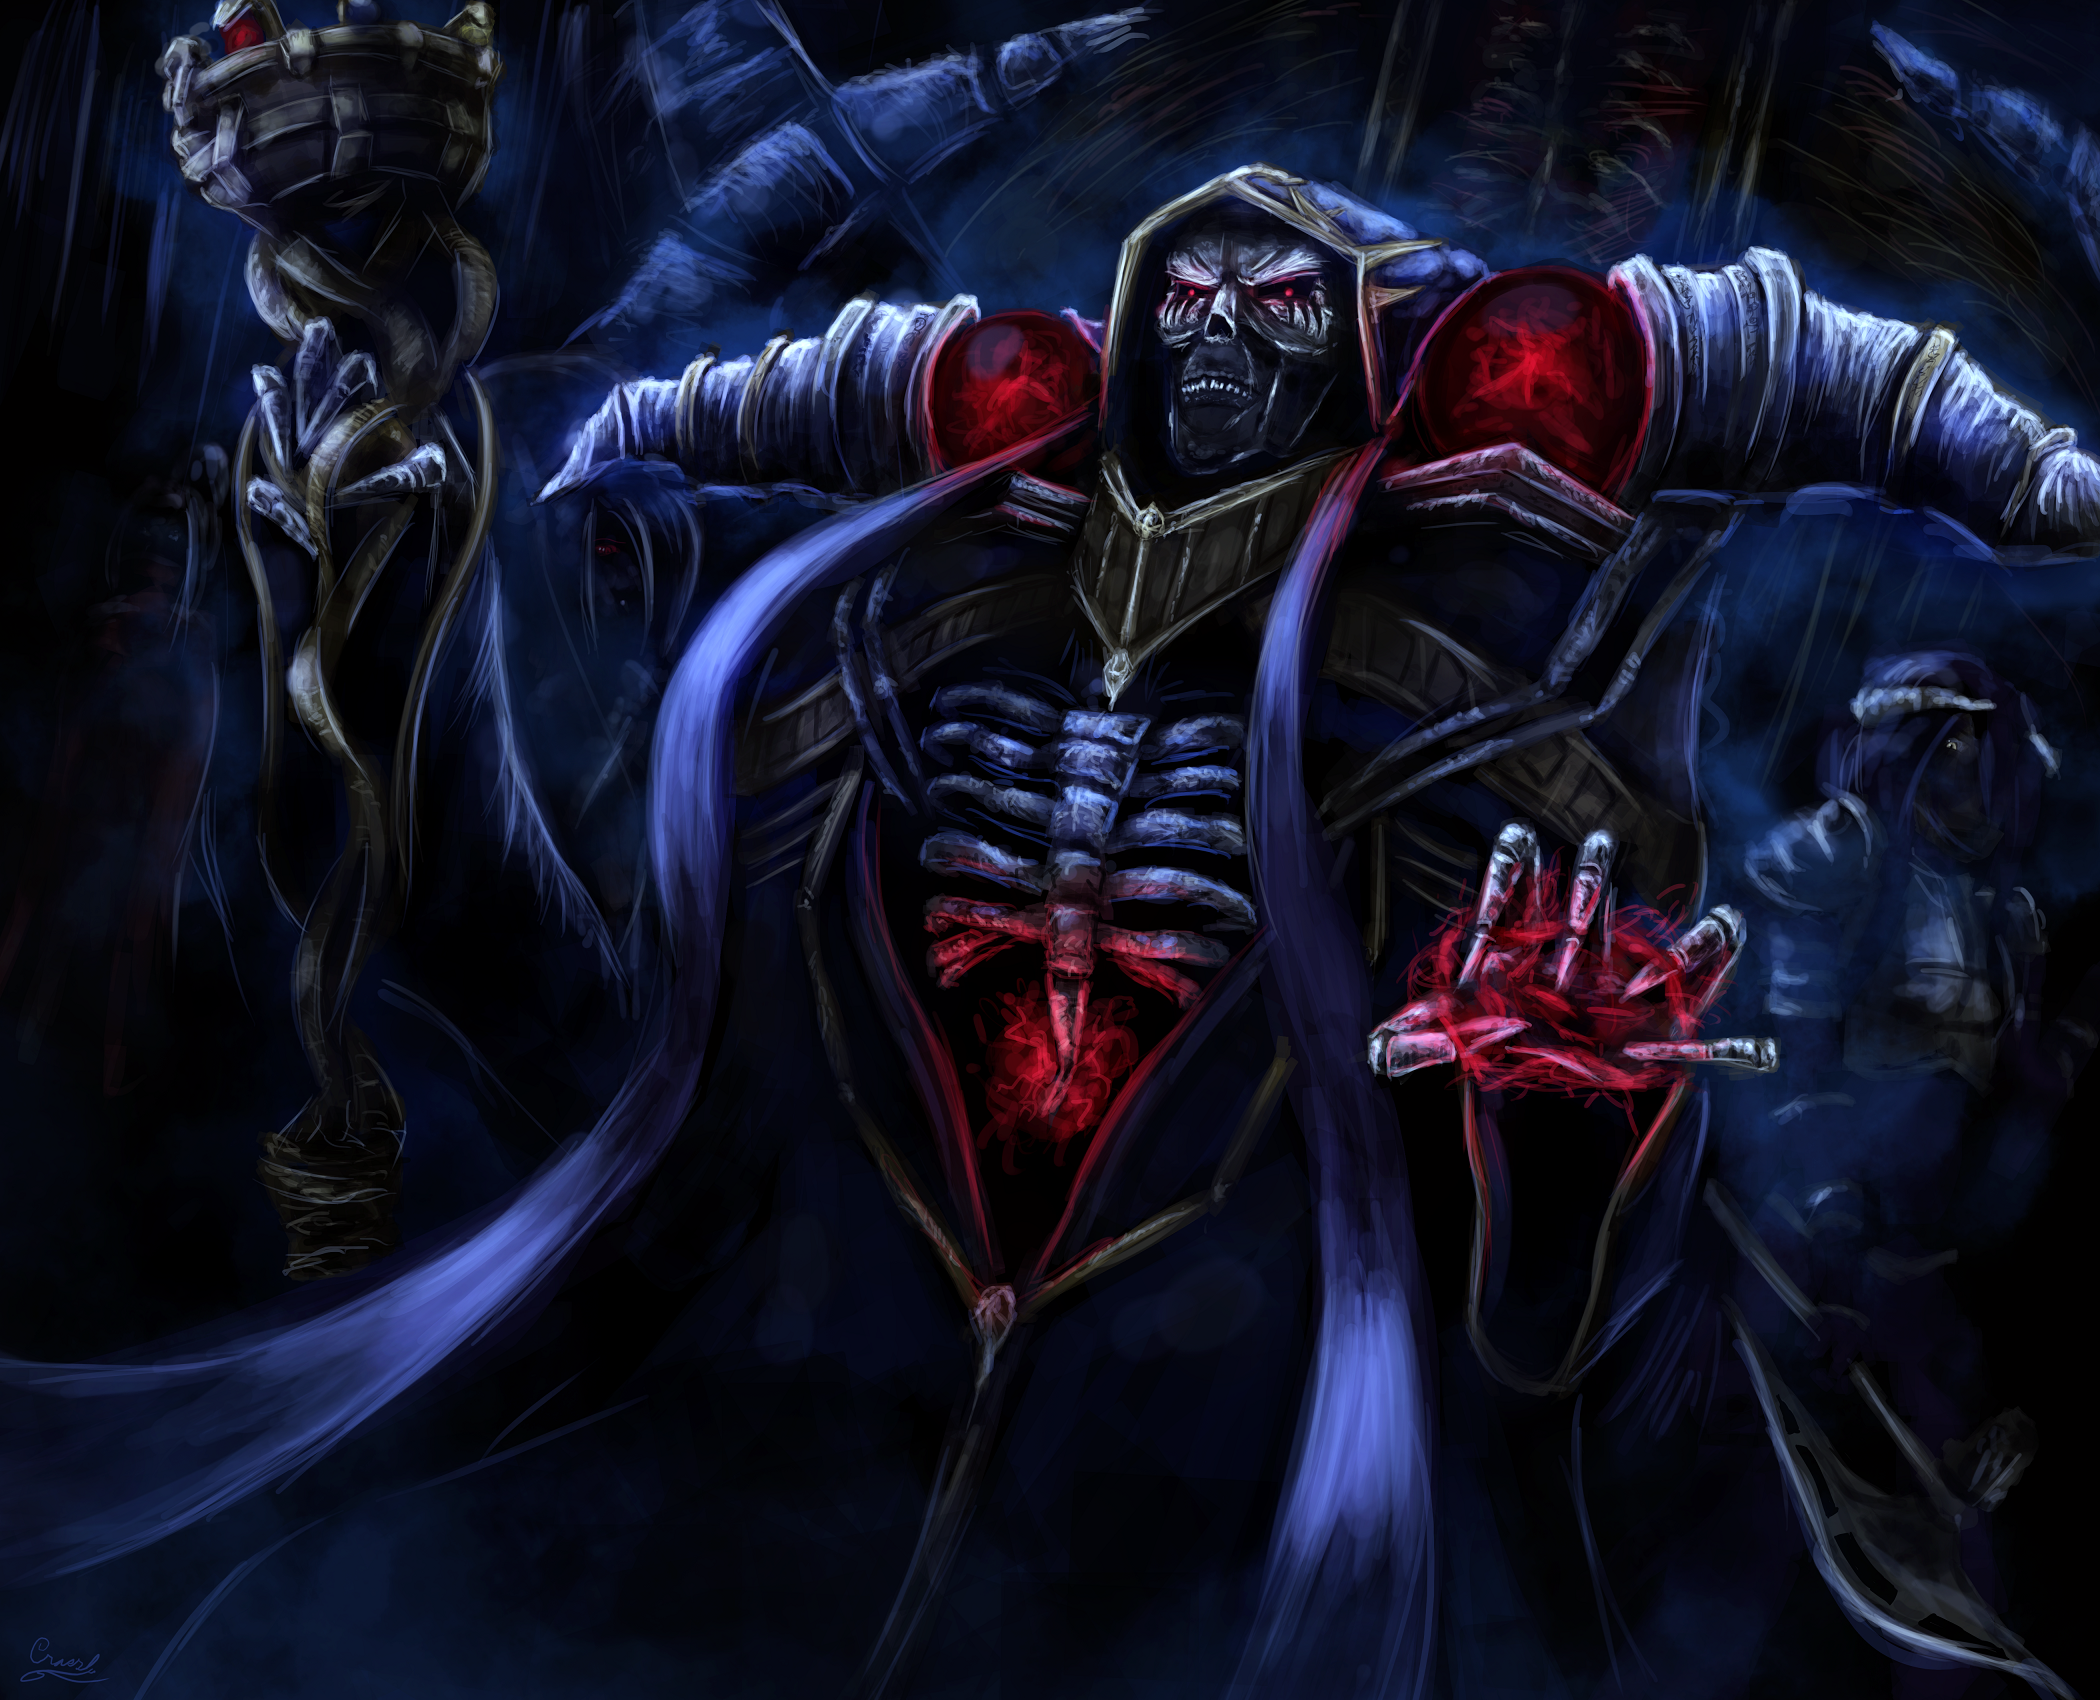 Ainz Ooal Gown by Craszh0